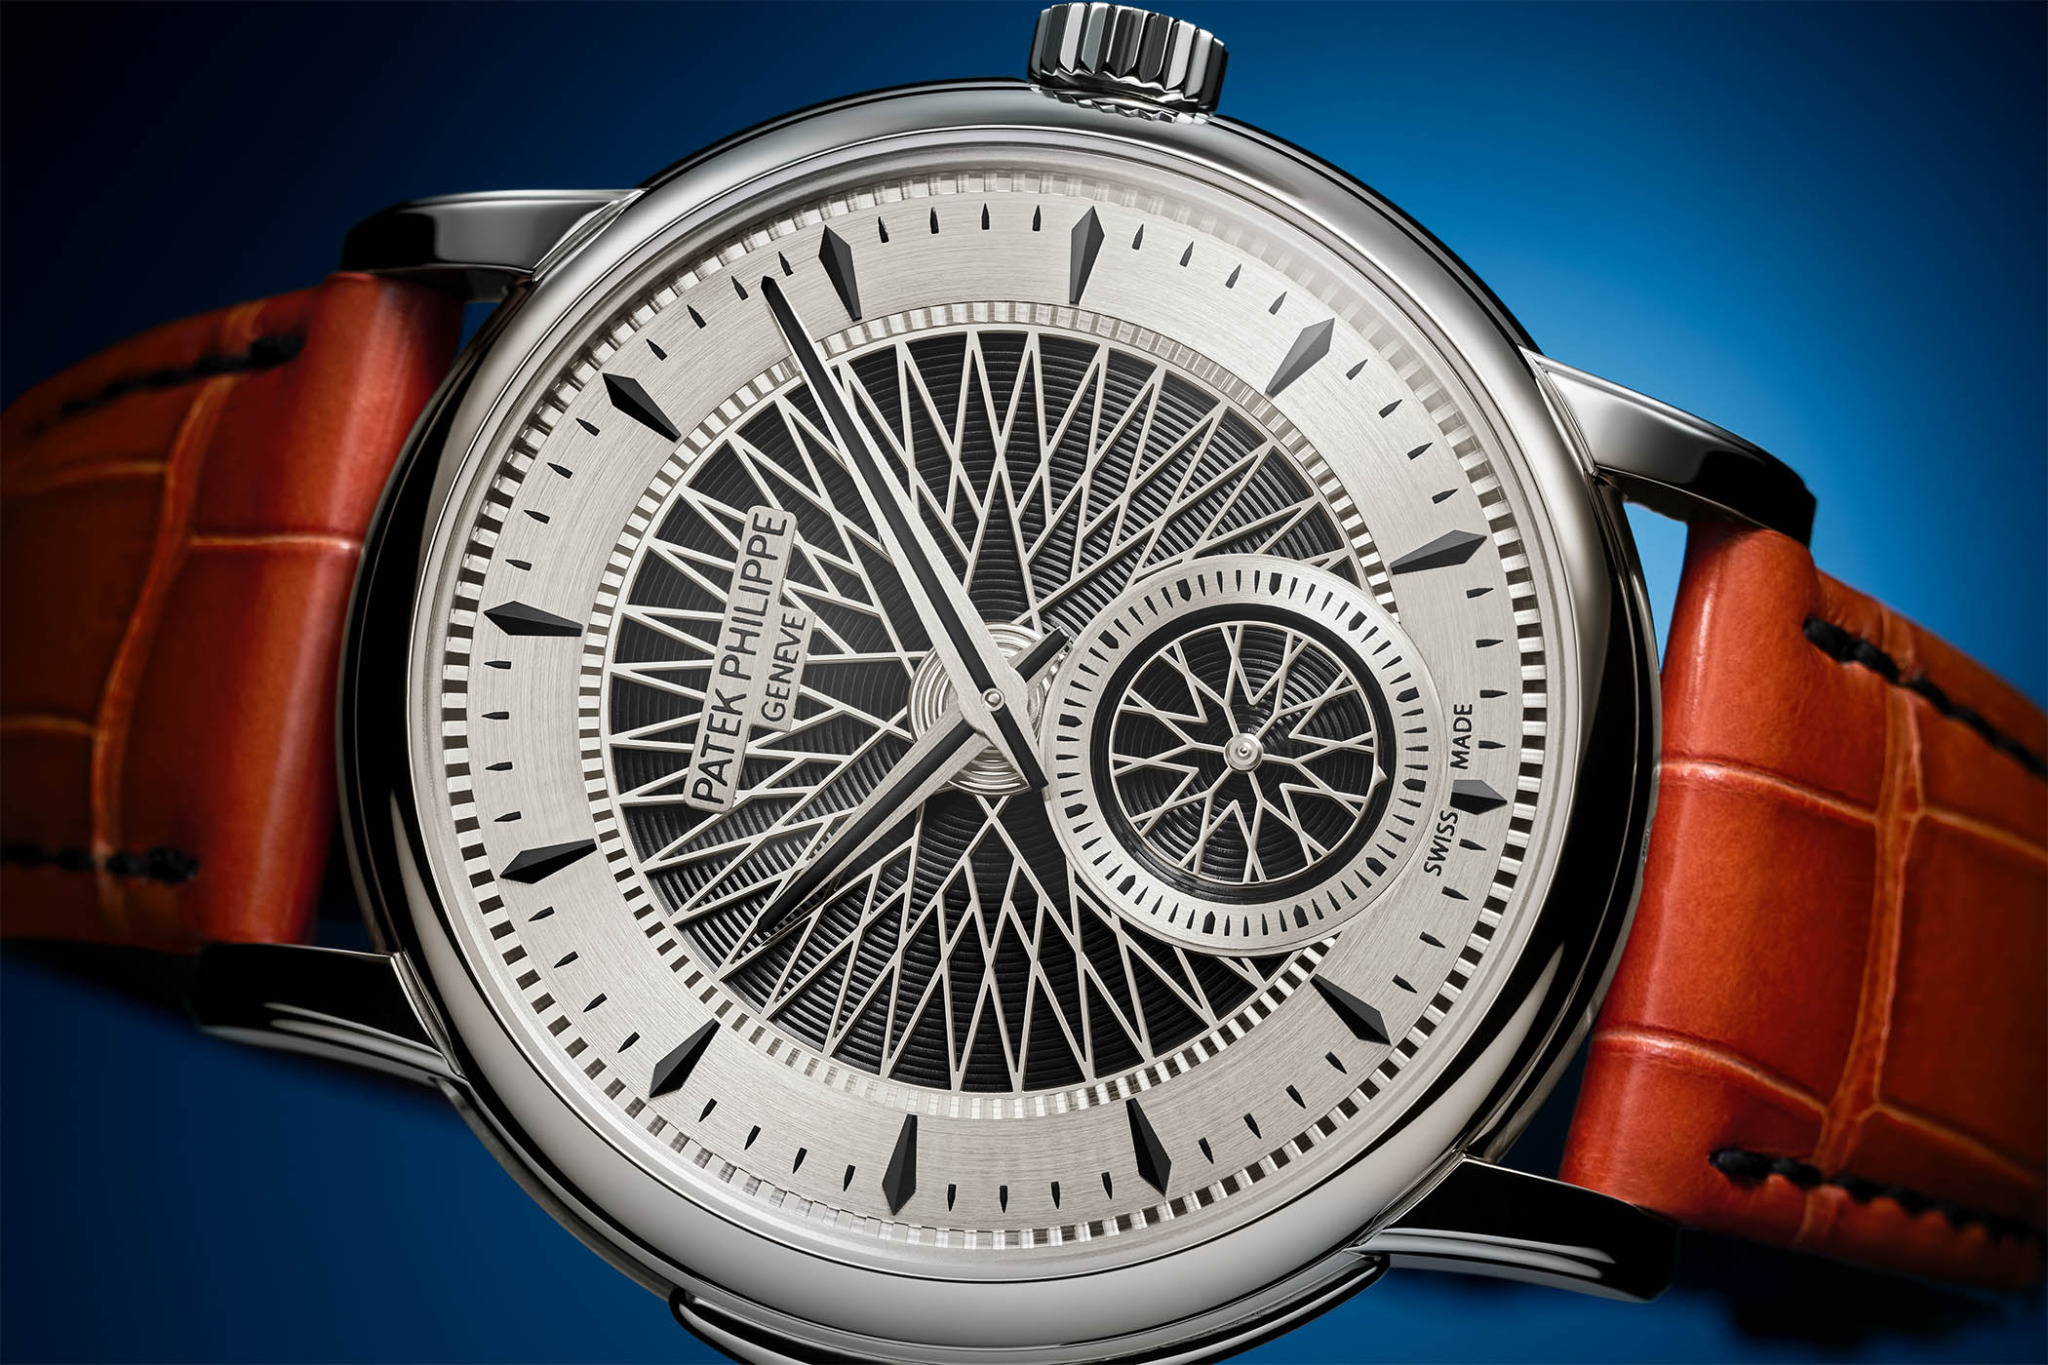 Patek Philippe Advanced Research Research 5750 Minute Repeater